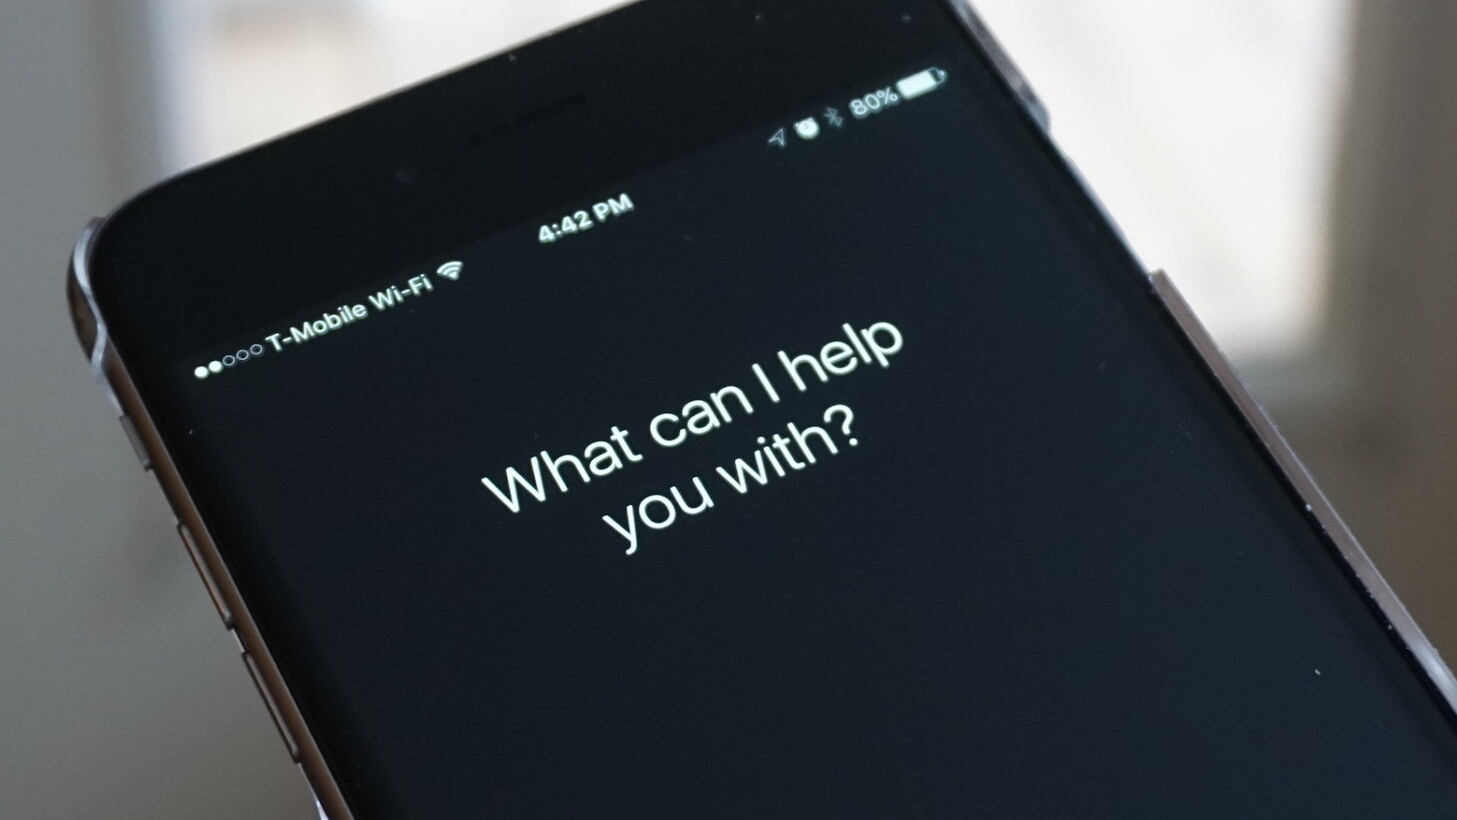 Apple wants Siri to stay neutral on feminism